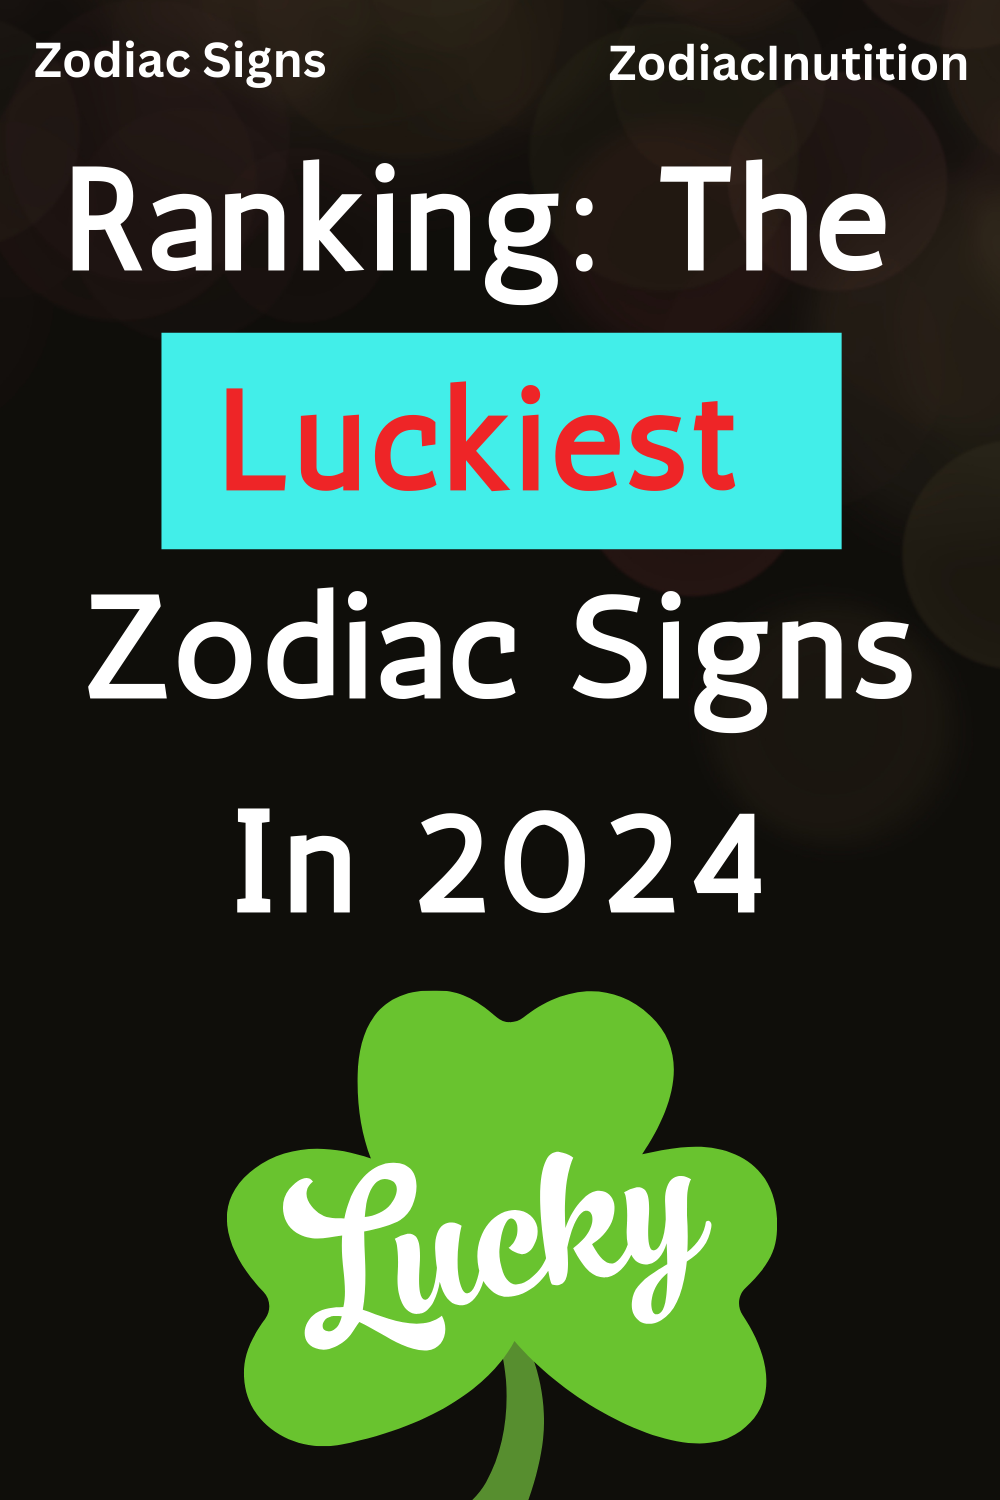 Ranking: The Luckiest Zodiac Signs In 2024